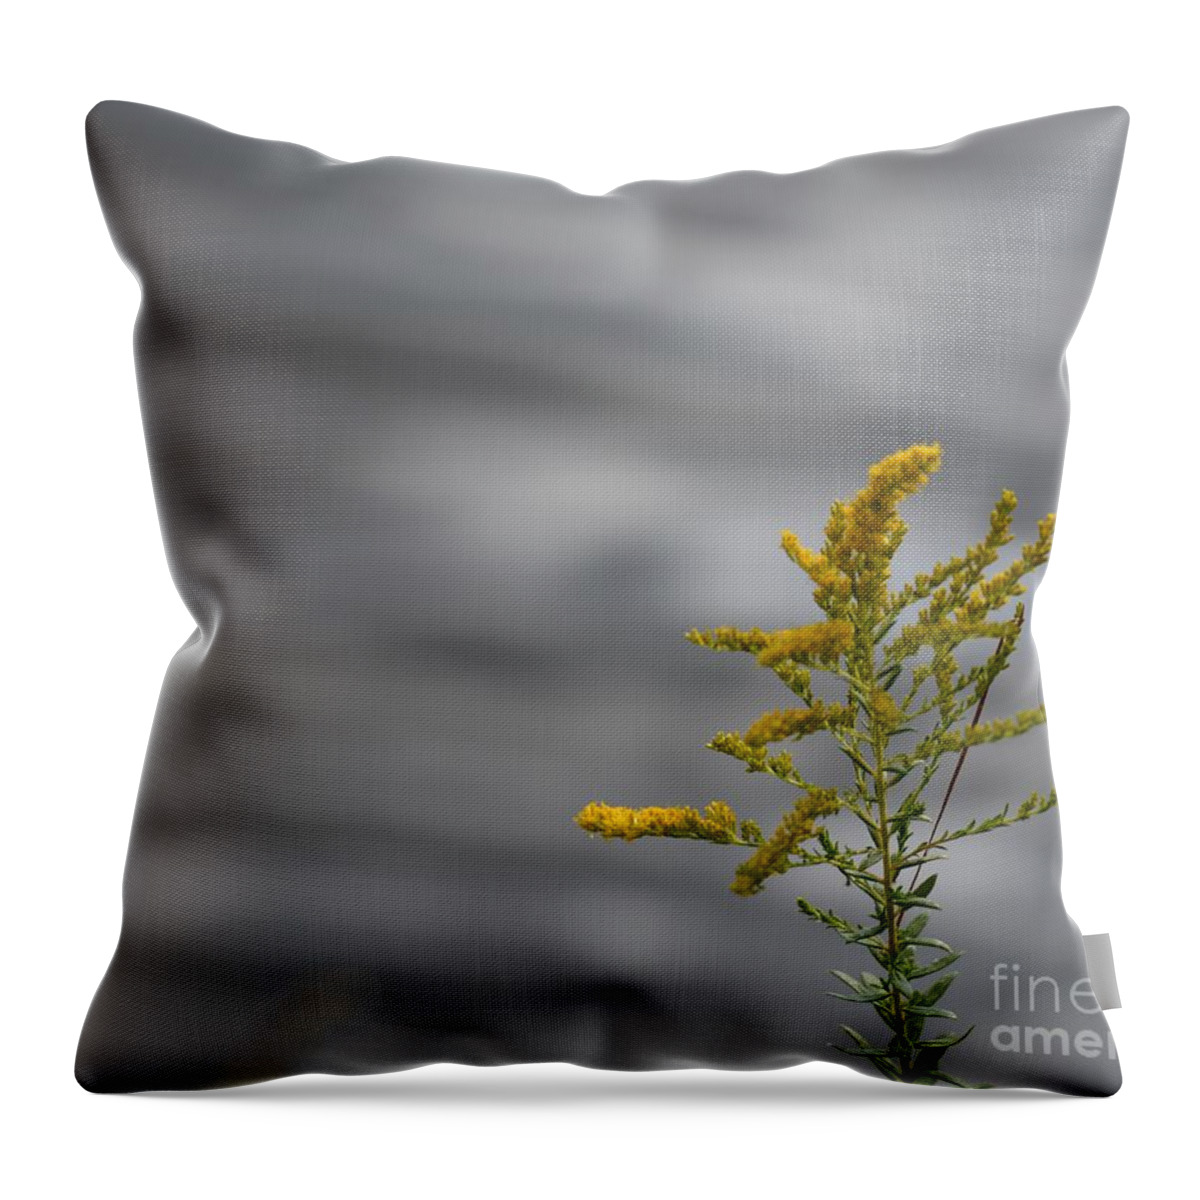 On Silvery Waters Throw Pillow featuring the photograph On Silvery Waters by Maria Urso